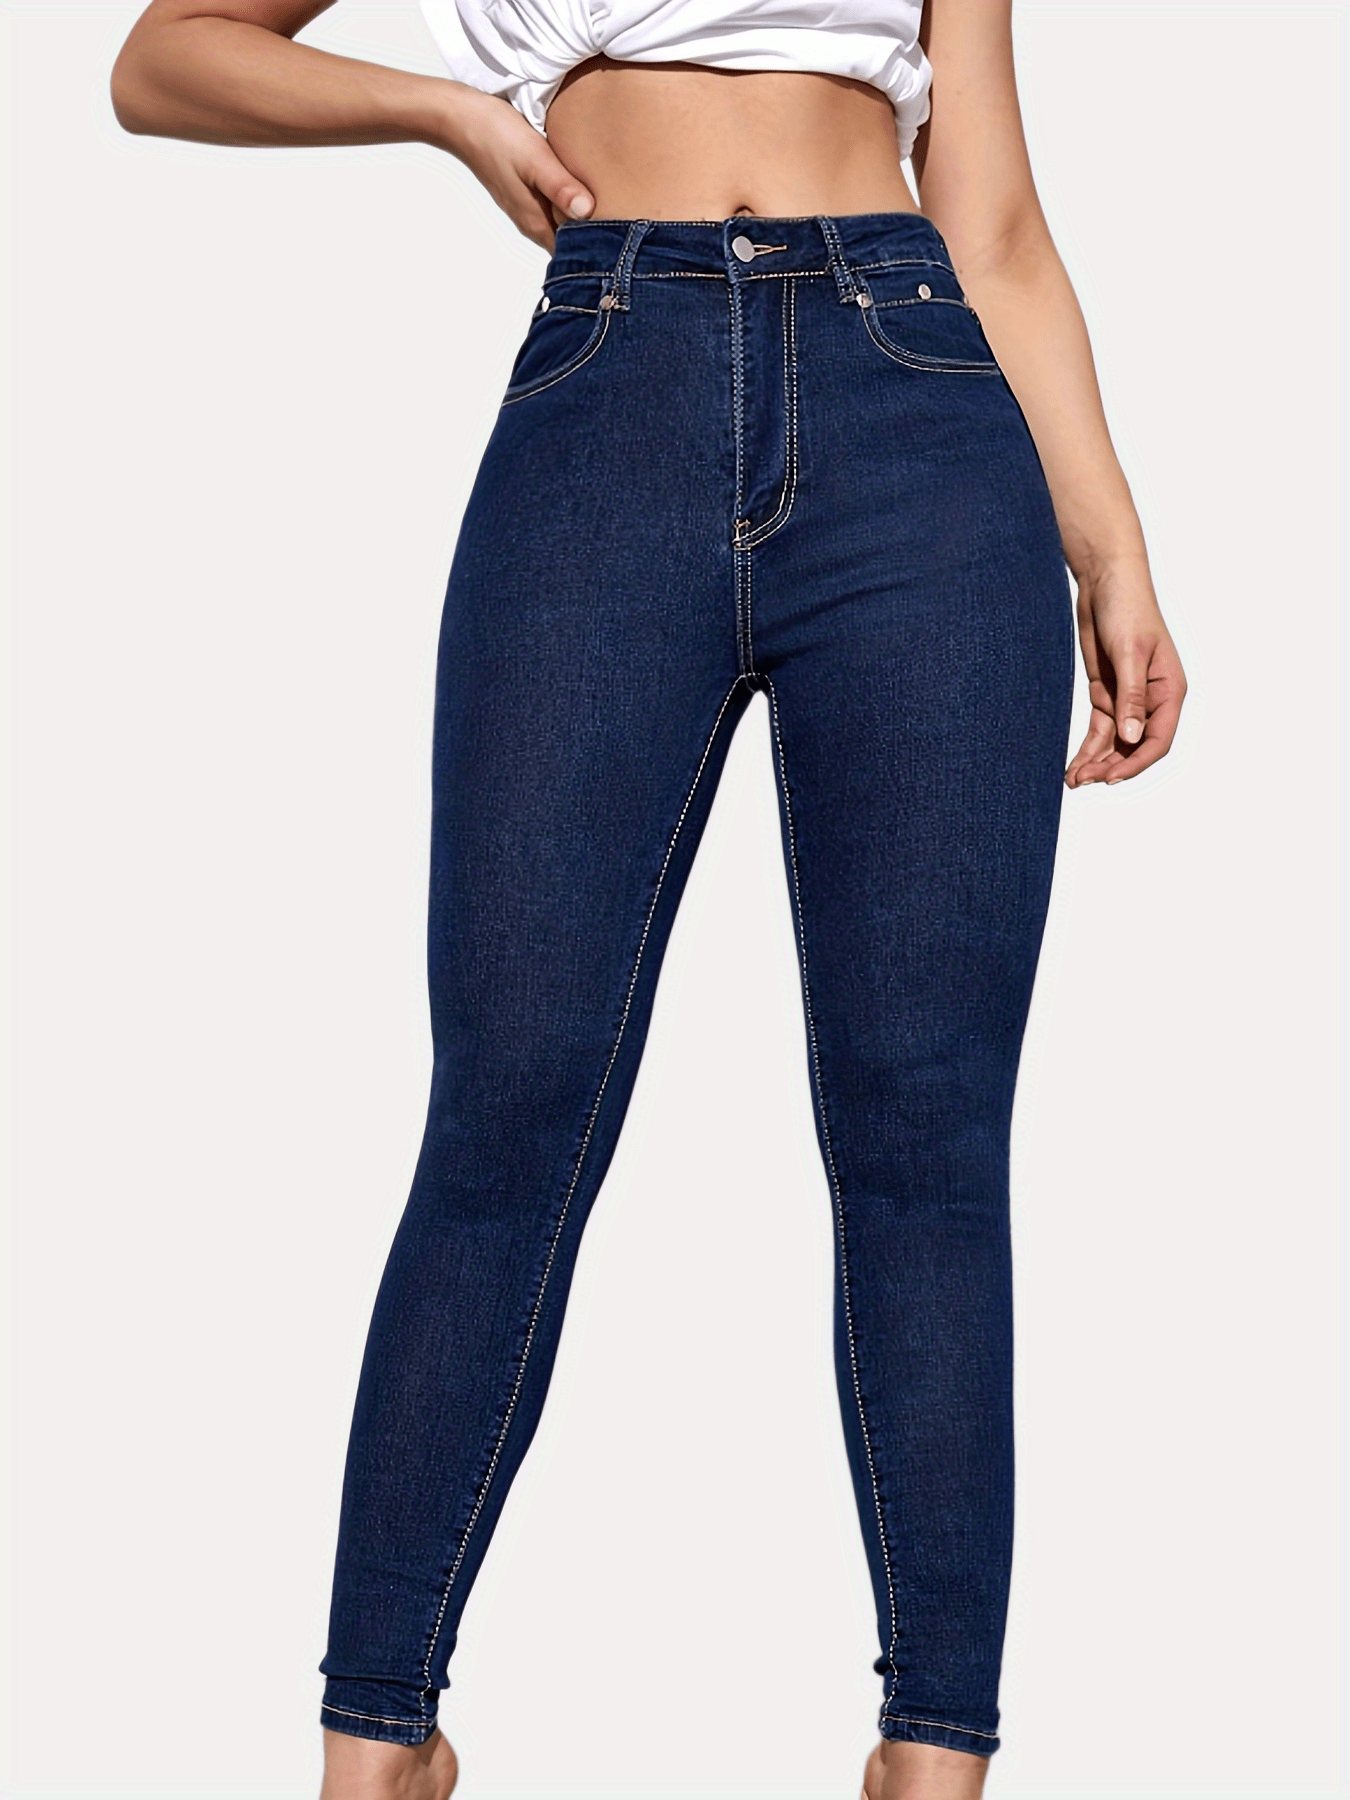 Bigersell Skinny Jeans for Women Full Length Pants Jeans Women Fashion High  Waist Wide Leg Stretch Thin Stitching Denim Flared Pants Ladies' Straight